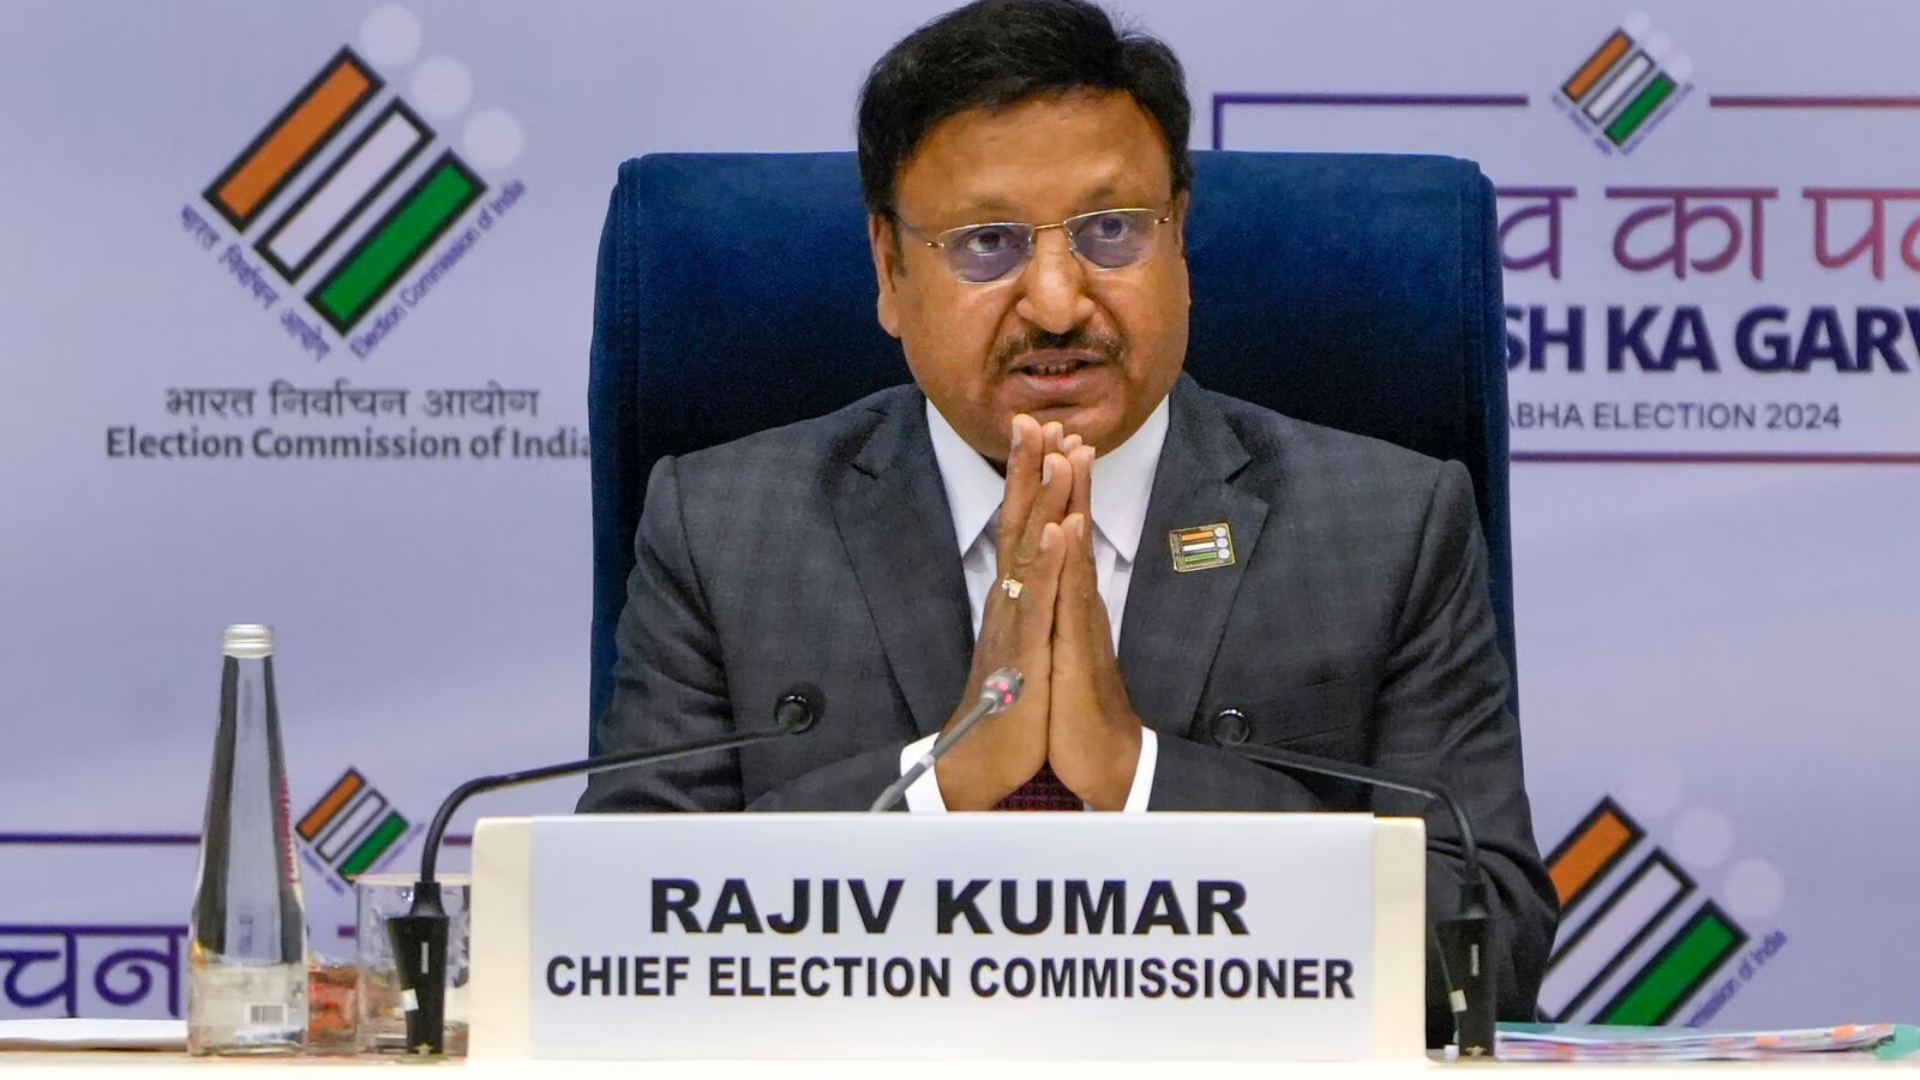 Election Commission Of India Implements District Administration Changes In 5 States, Transfers Non-Cadre DMs & SPs